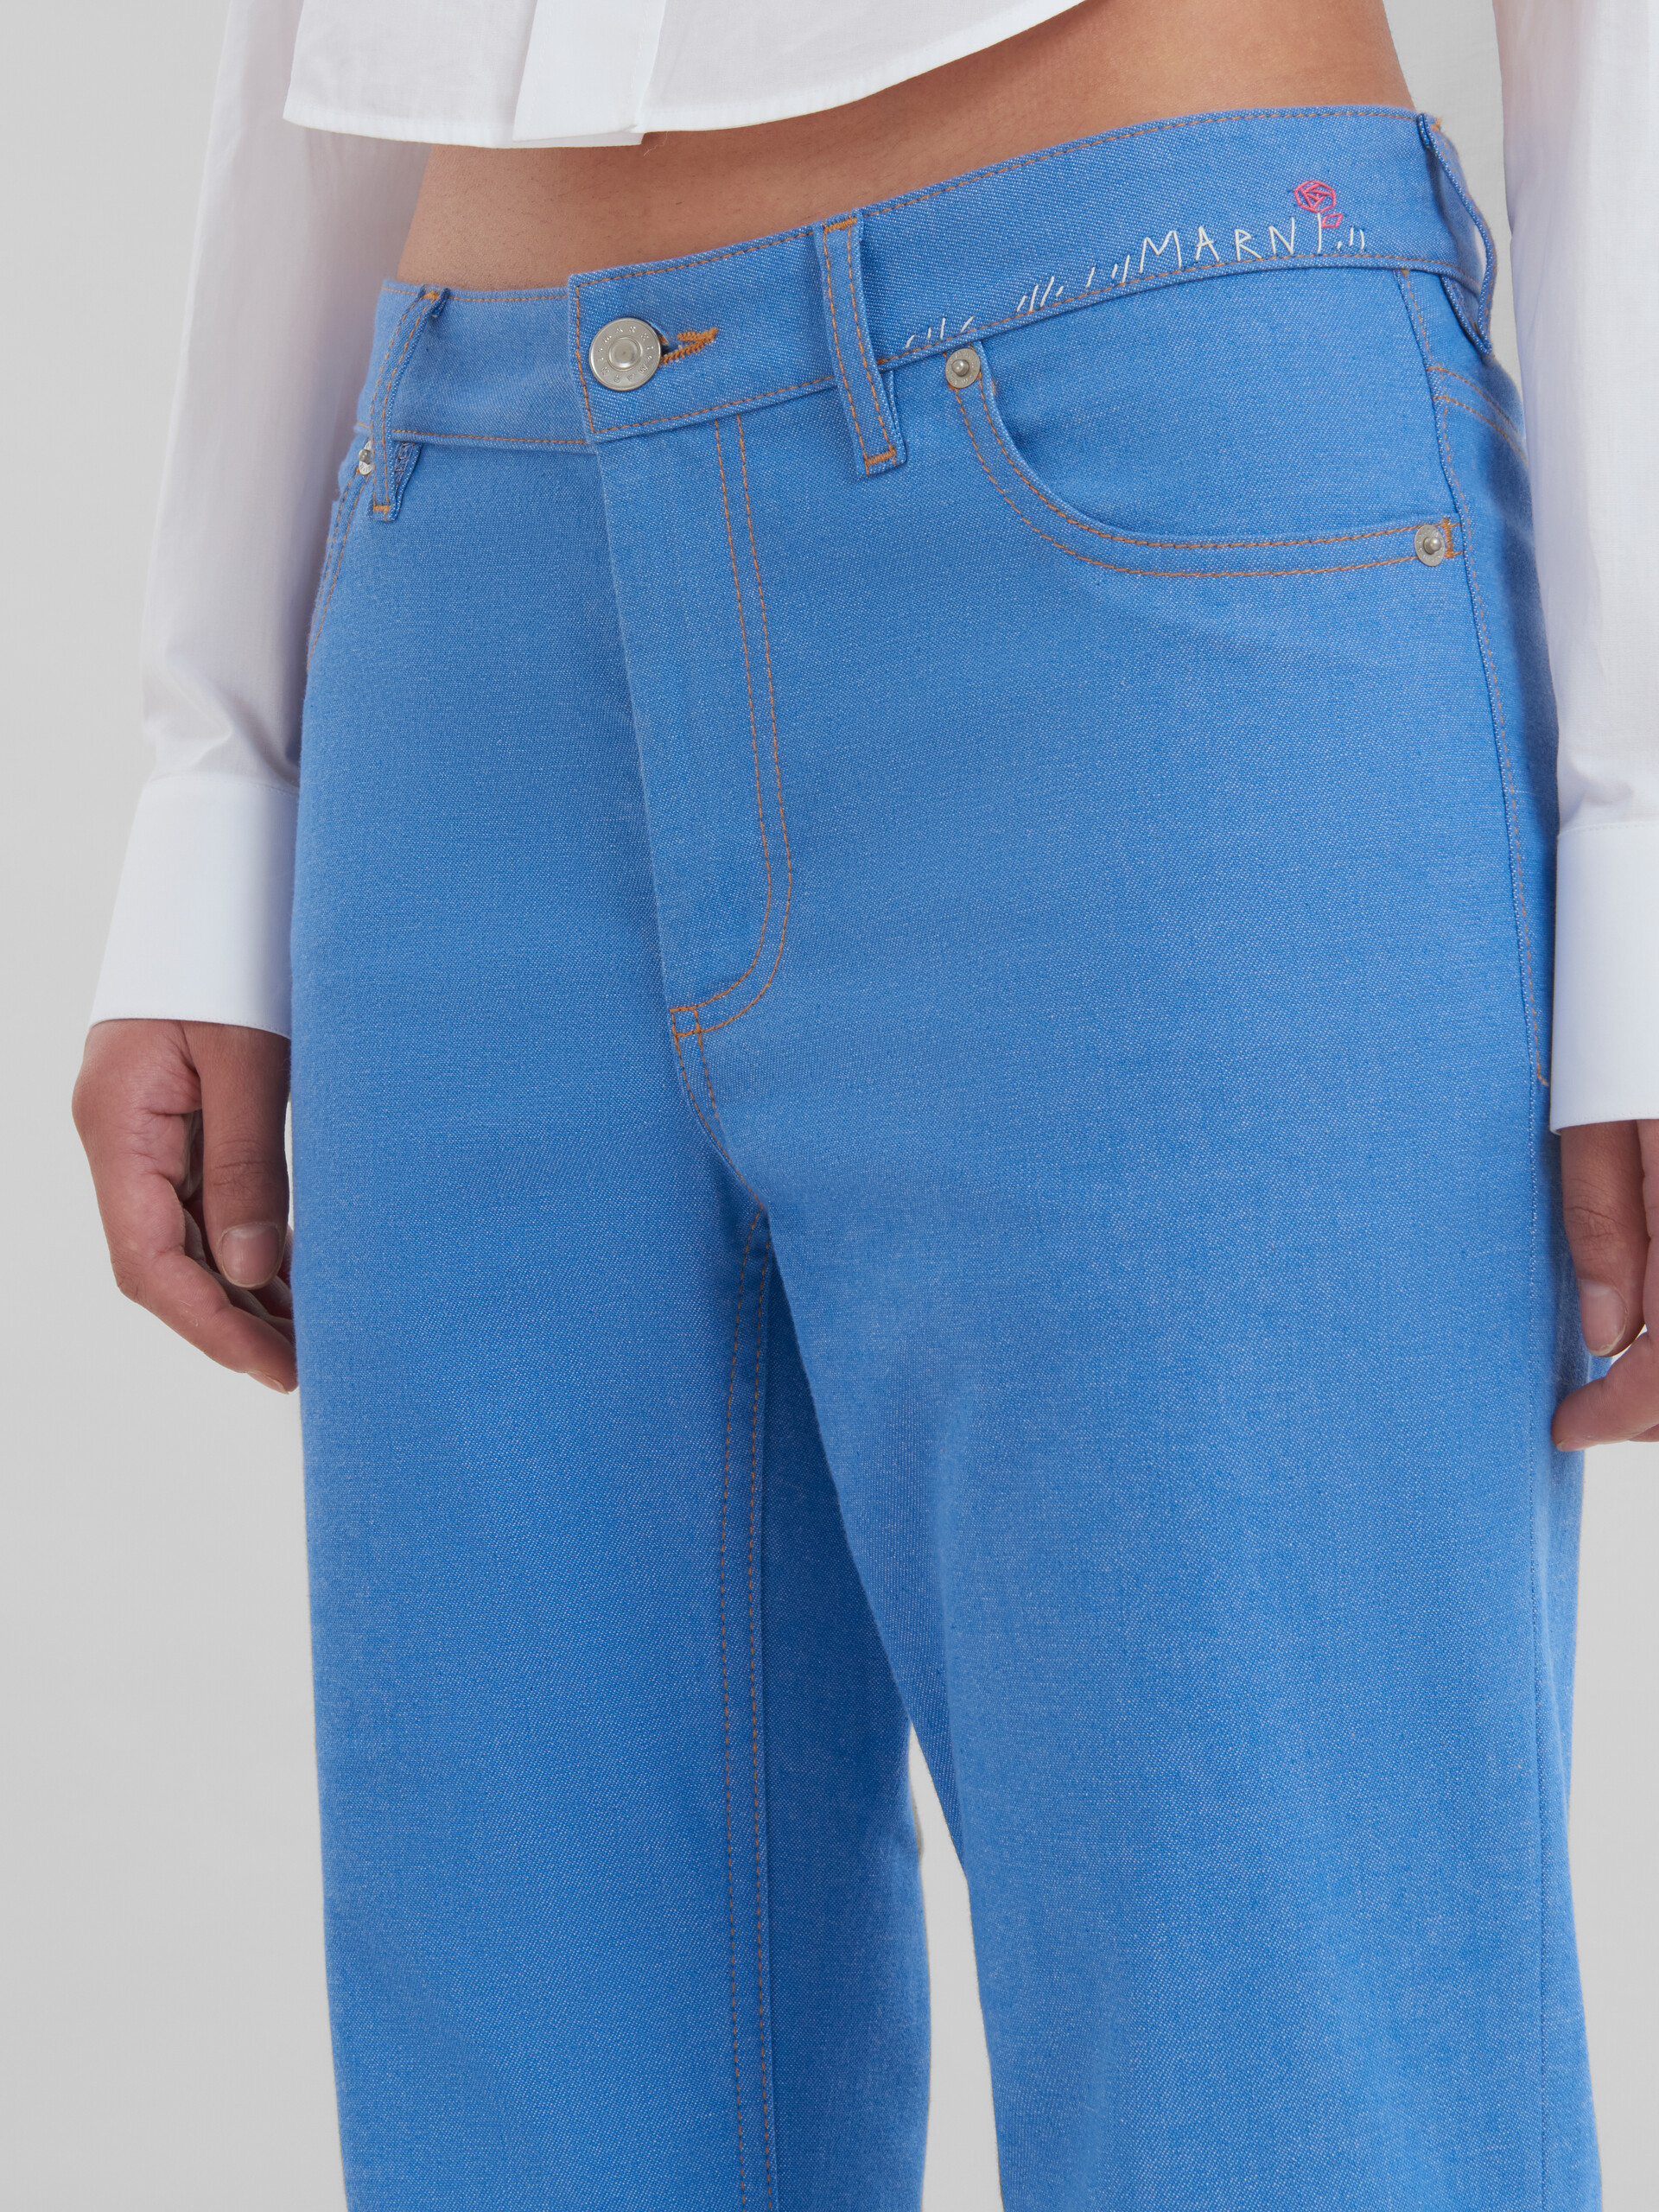 Blue stretch denim flared trousers - Pants - Image 4